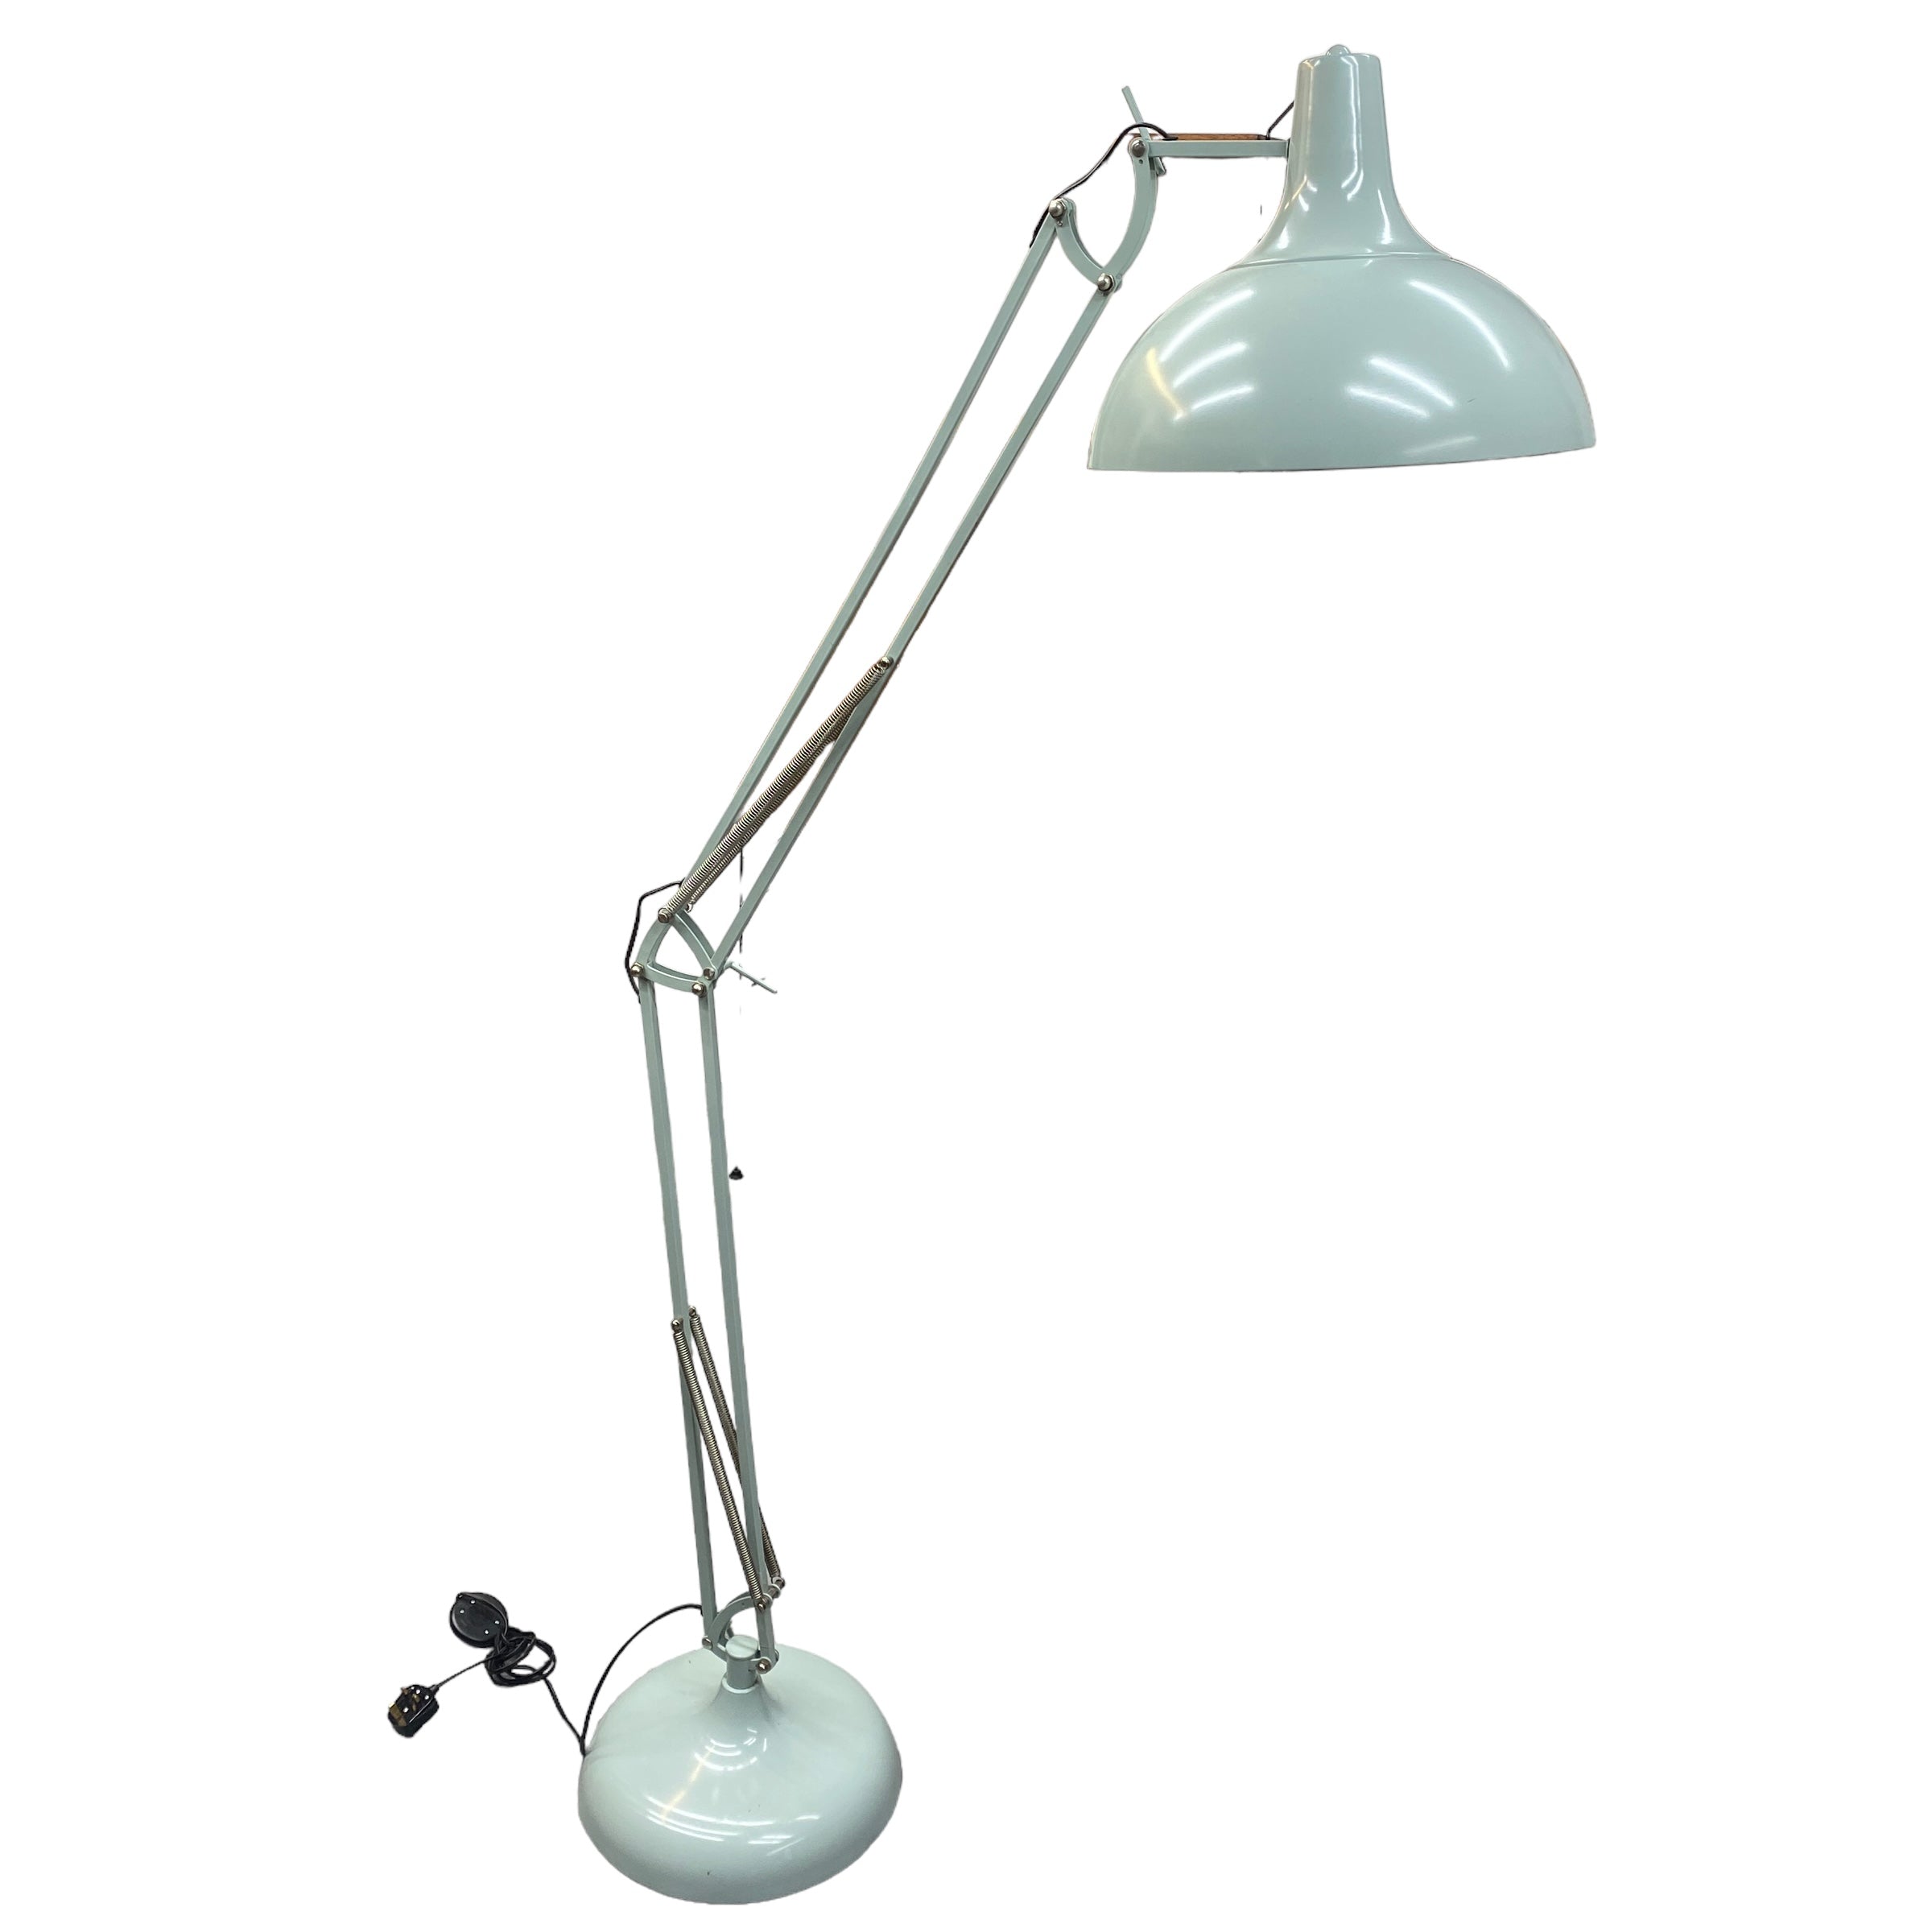 Tall Anglepoise Floor Standing